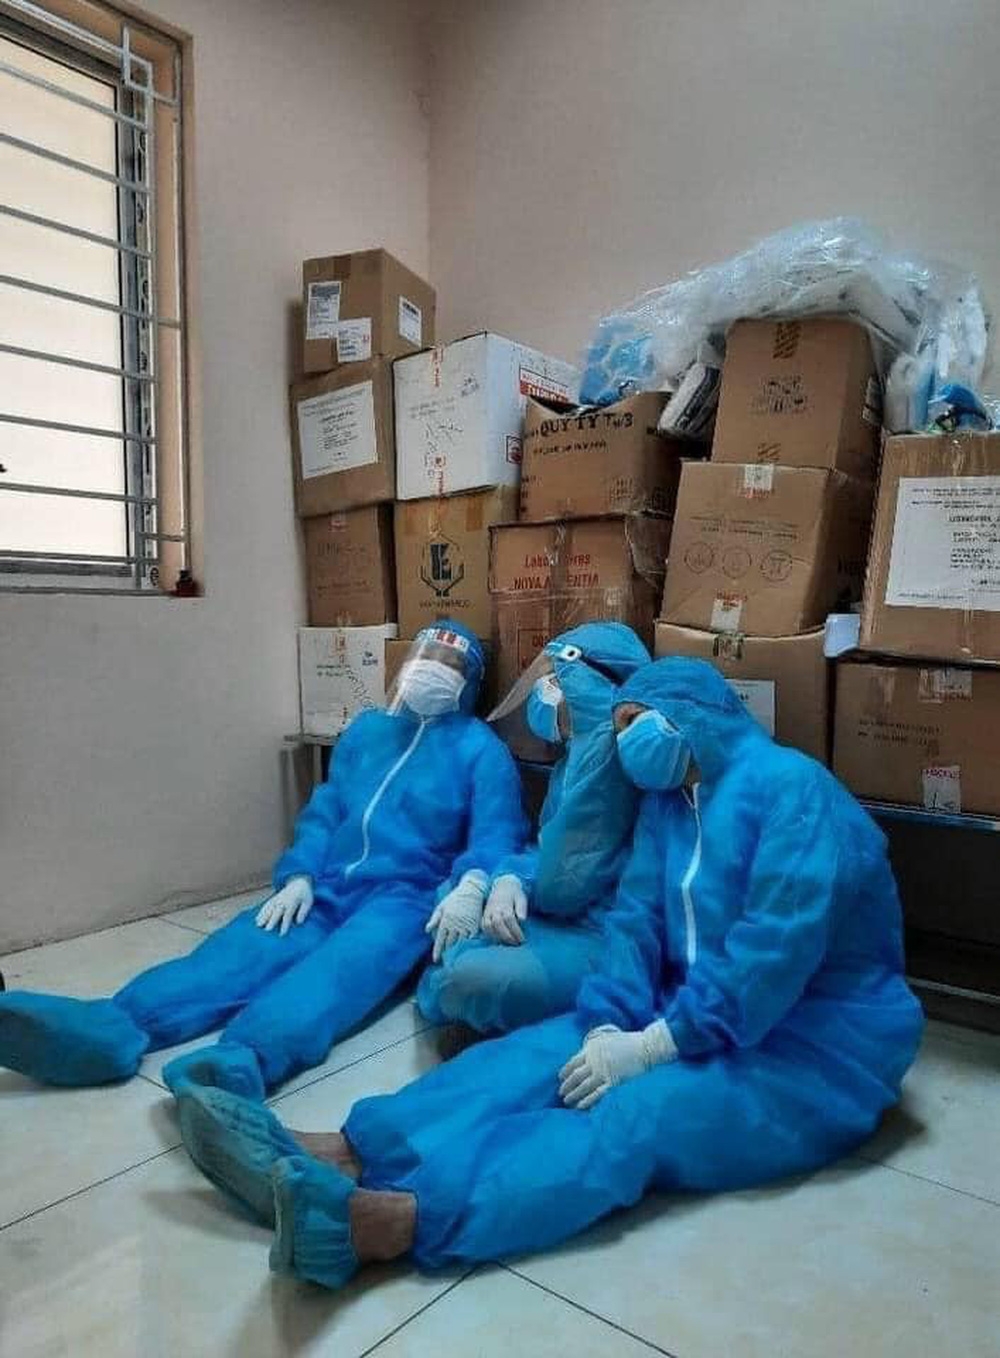 Heart-wrenching photos of exhausted frontline health workers